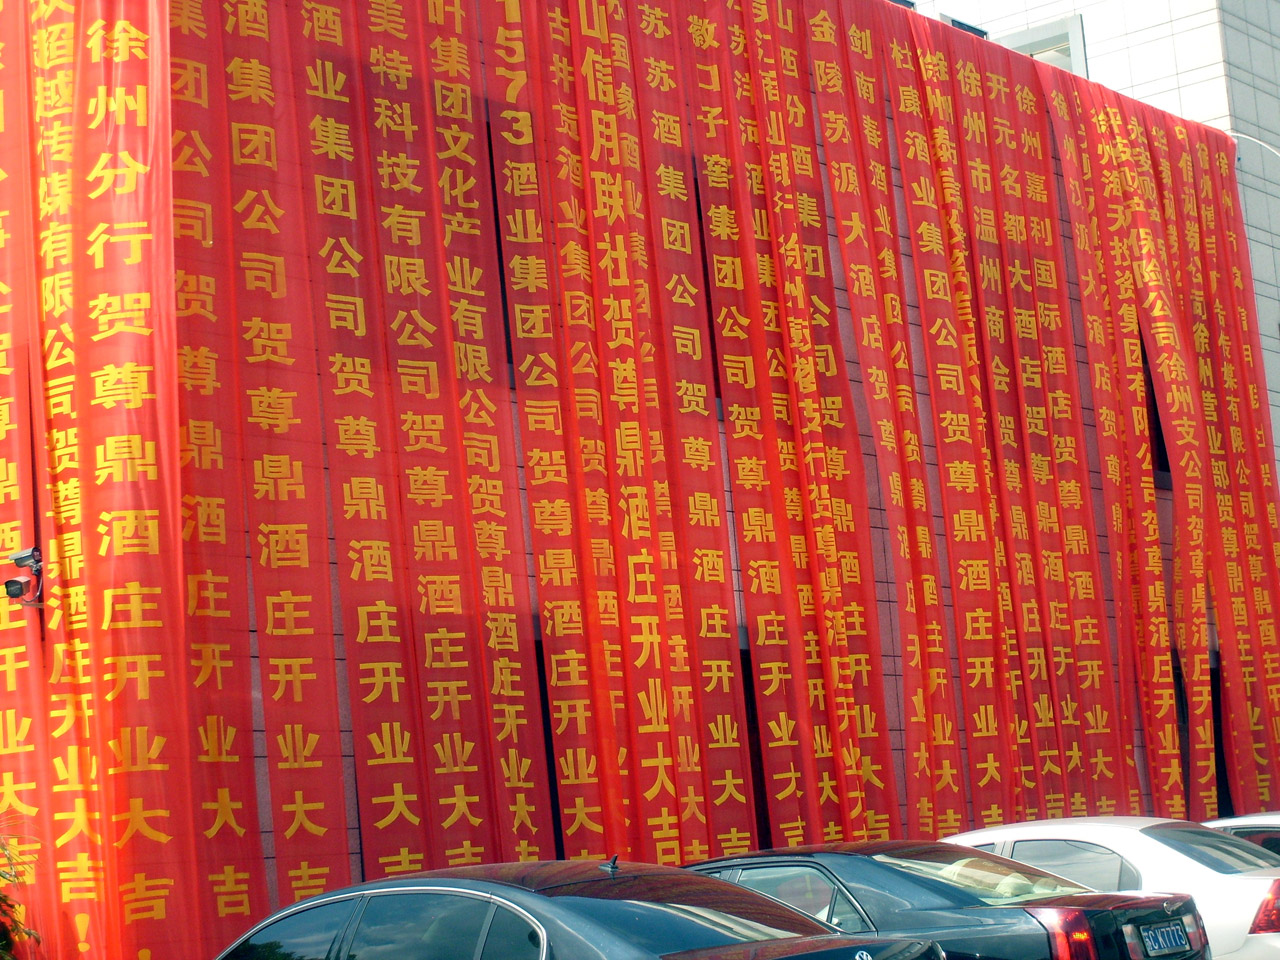 banners on a wall of restaurant